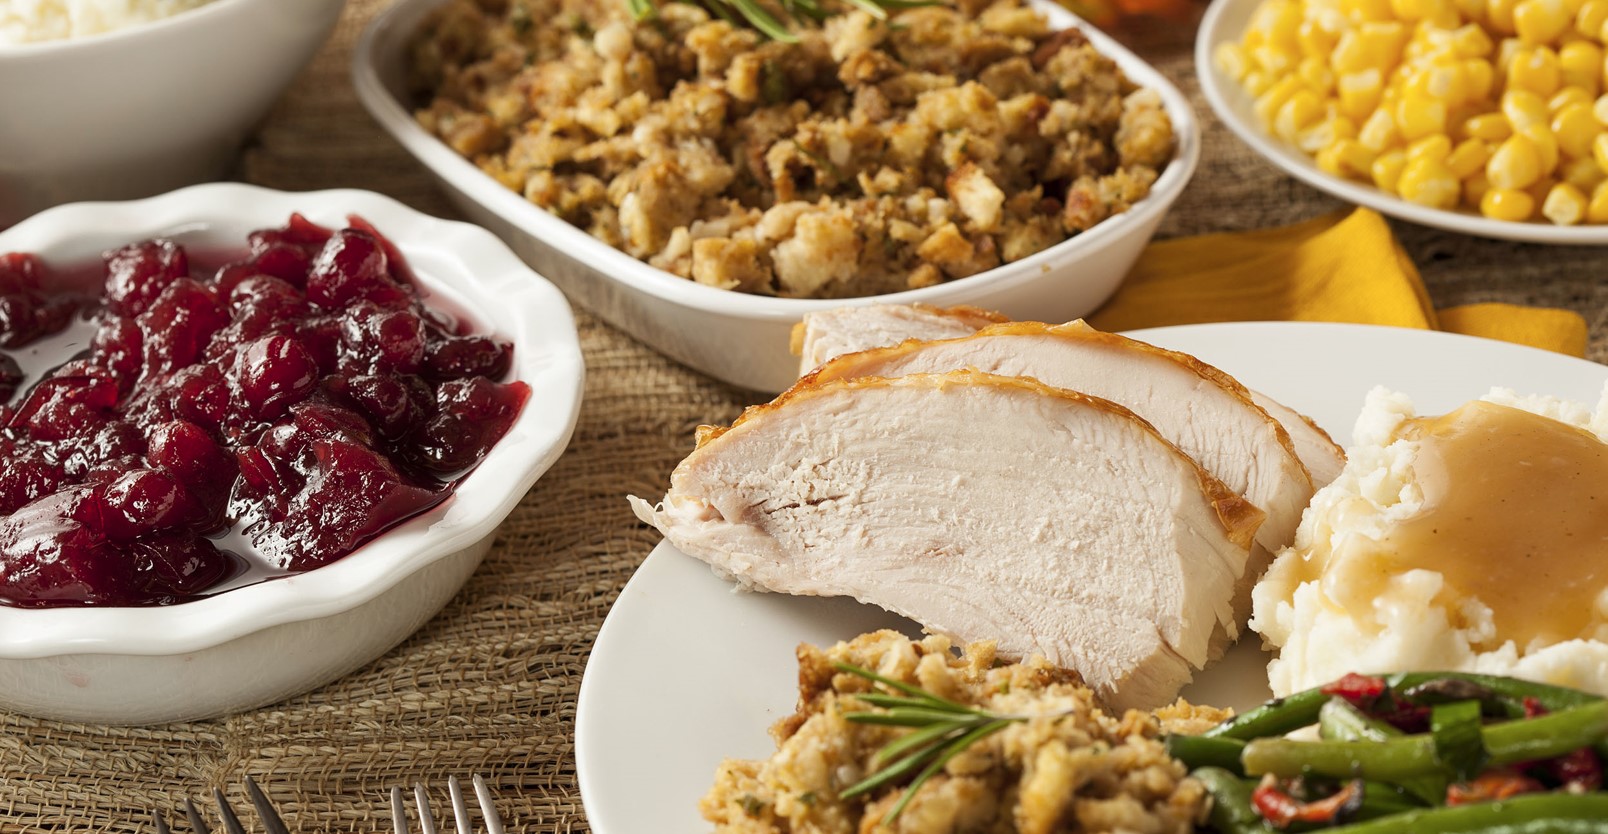 What Causes Post-Meal Drowsiness on Thanksgiving Day